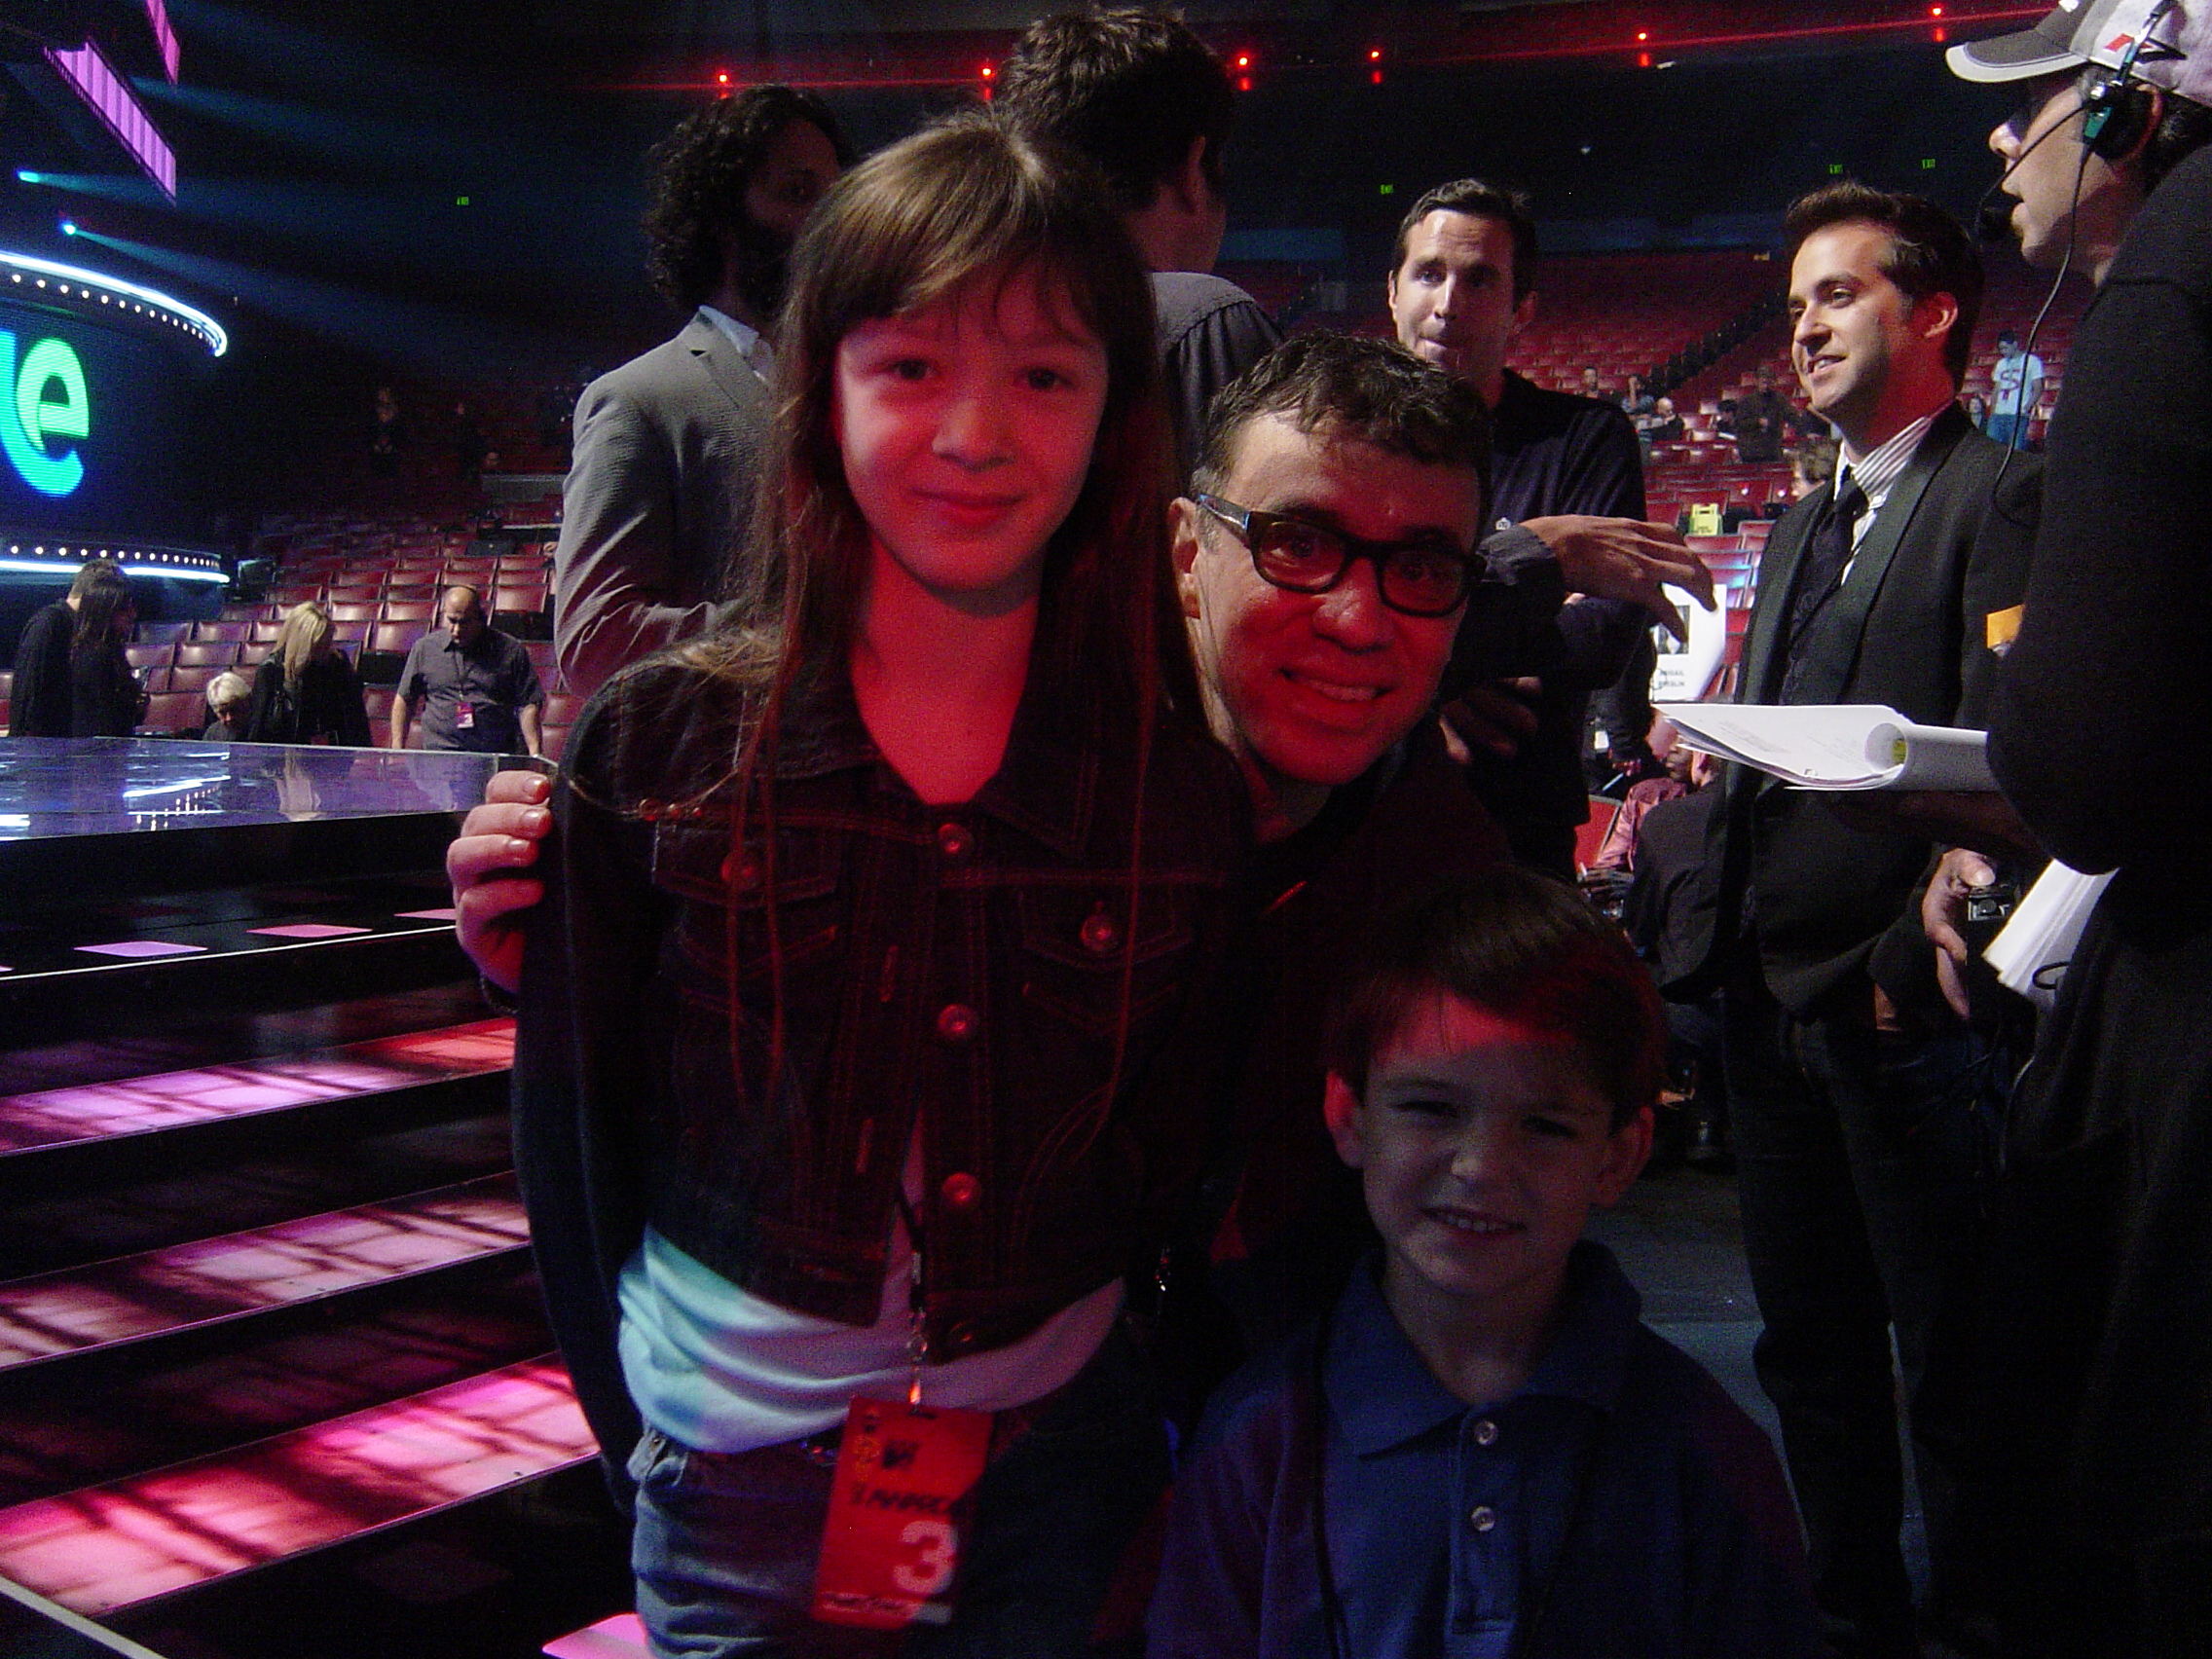 Mary-Jessica with Fred Armisen (he played her Dad) and Davin Ransome, at the 2009 MTV Movie Awards.